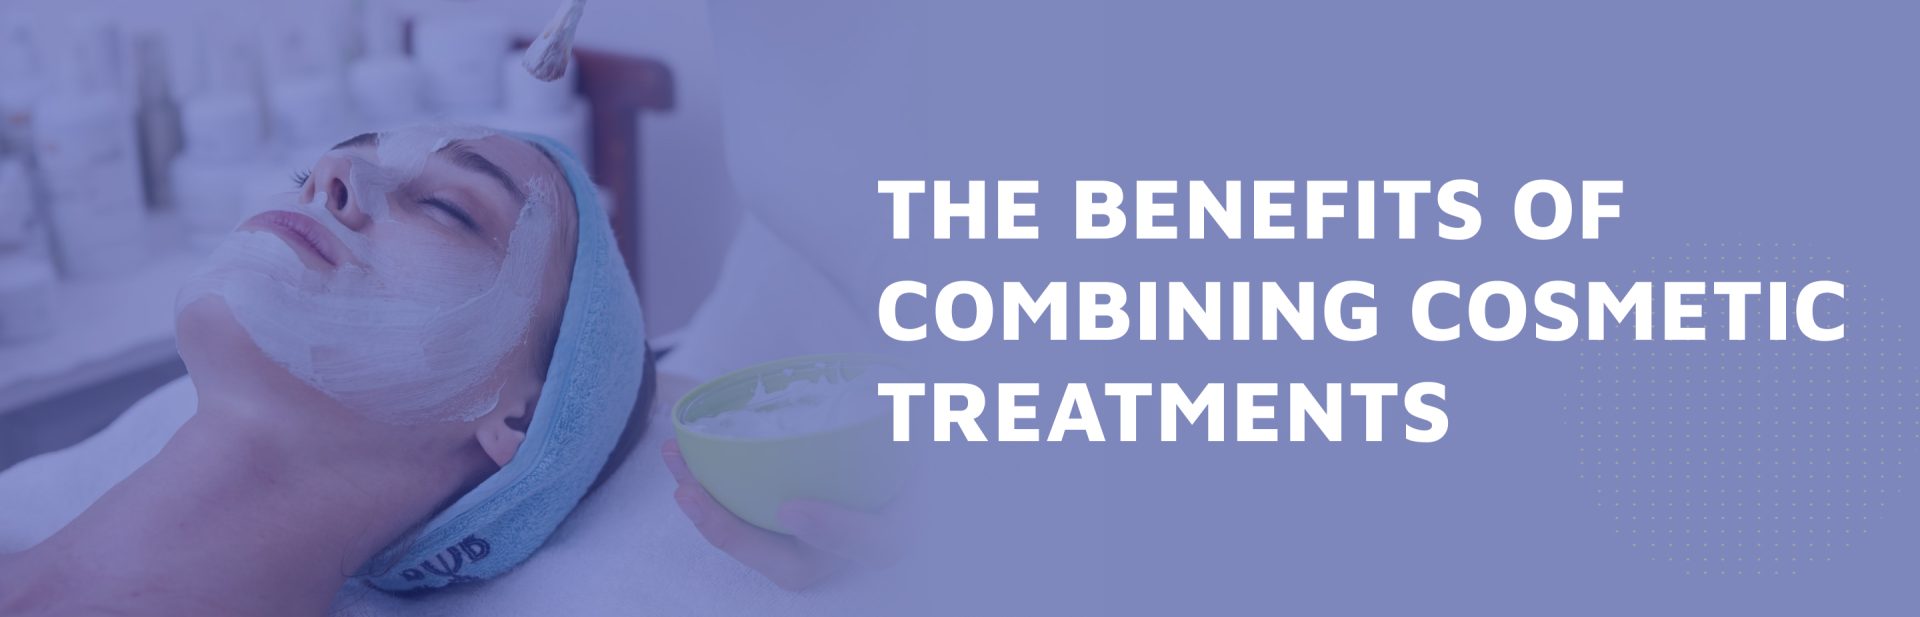 The-Benefits-of-Combining-Cosmetic-Treatments